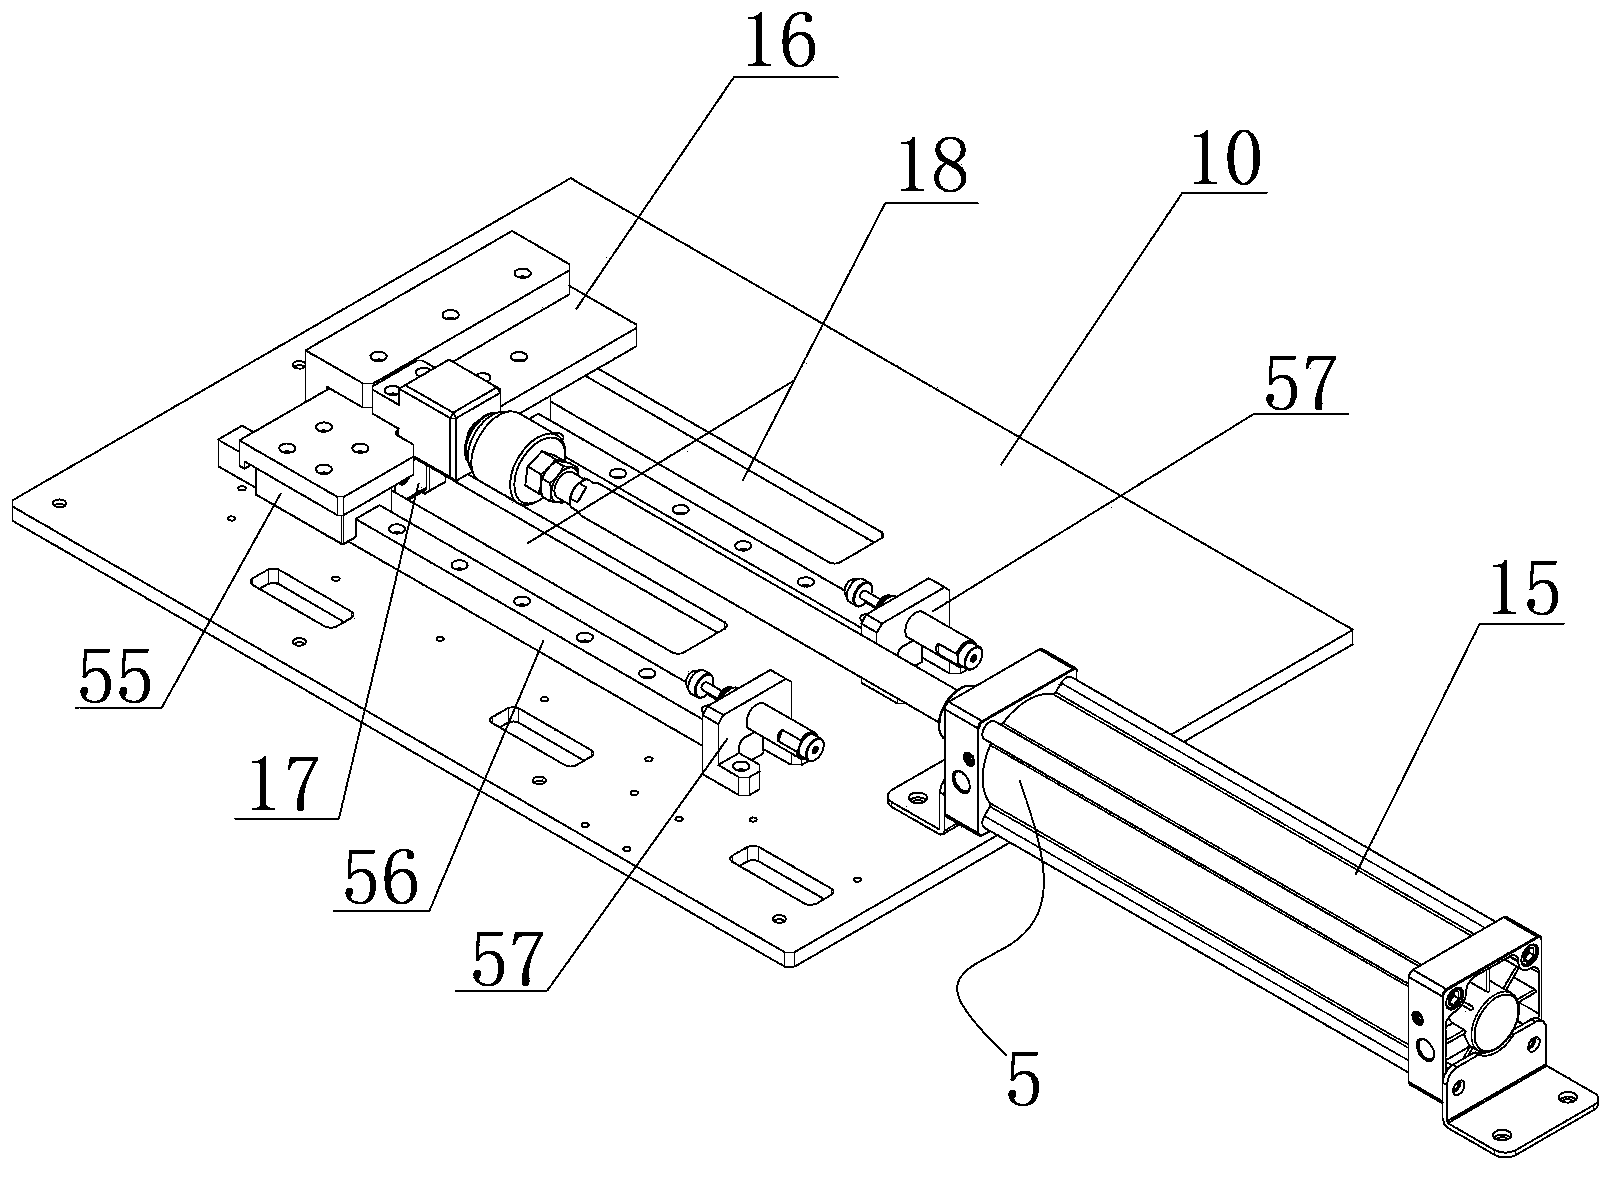 Multi-station automatic detection apparatus for electronic products